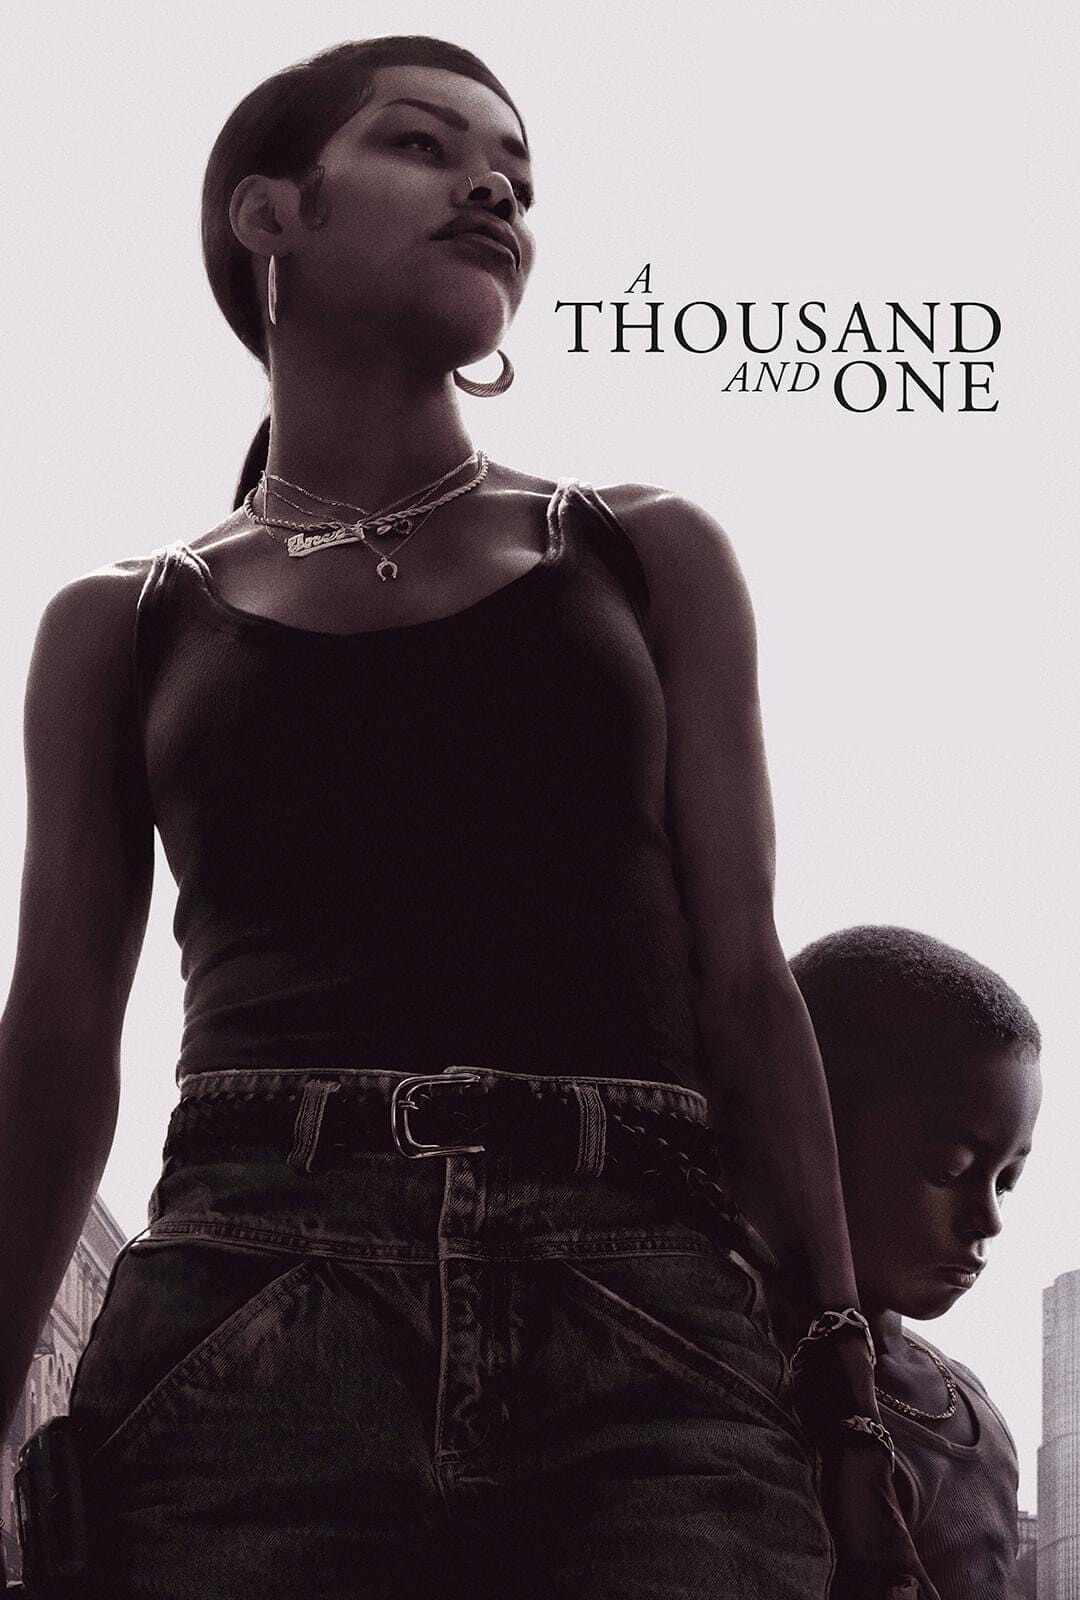 A Thousand And One 2023 1080p WEB-DL DDP5 1 Atmos x264-AOC